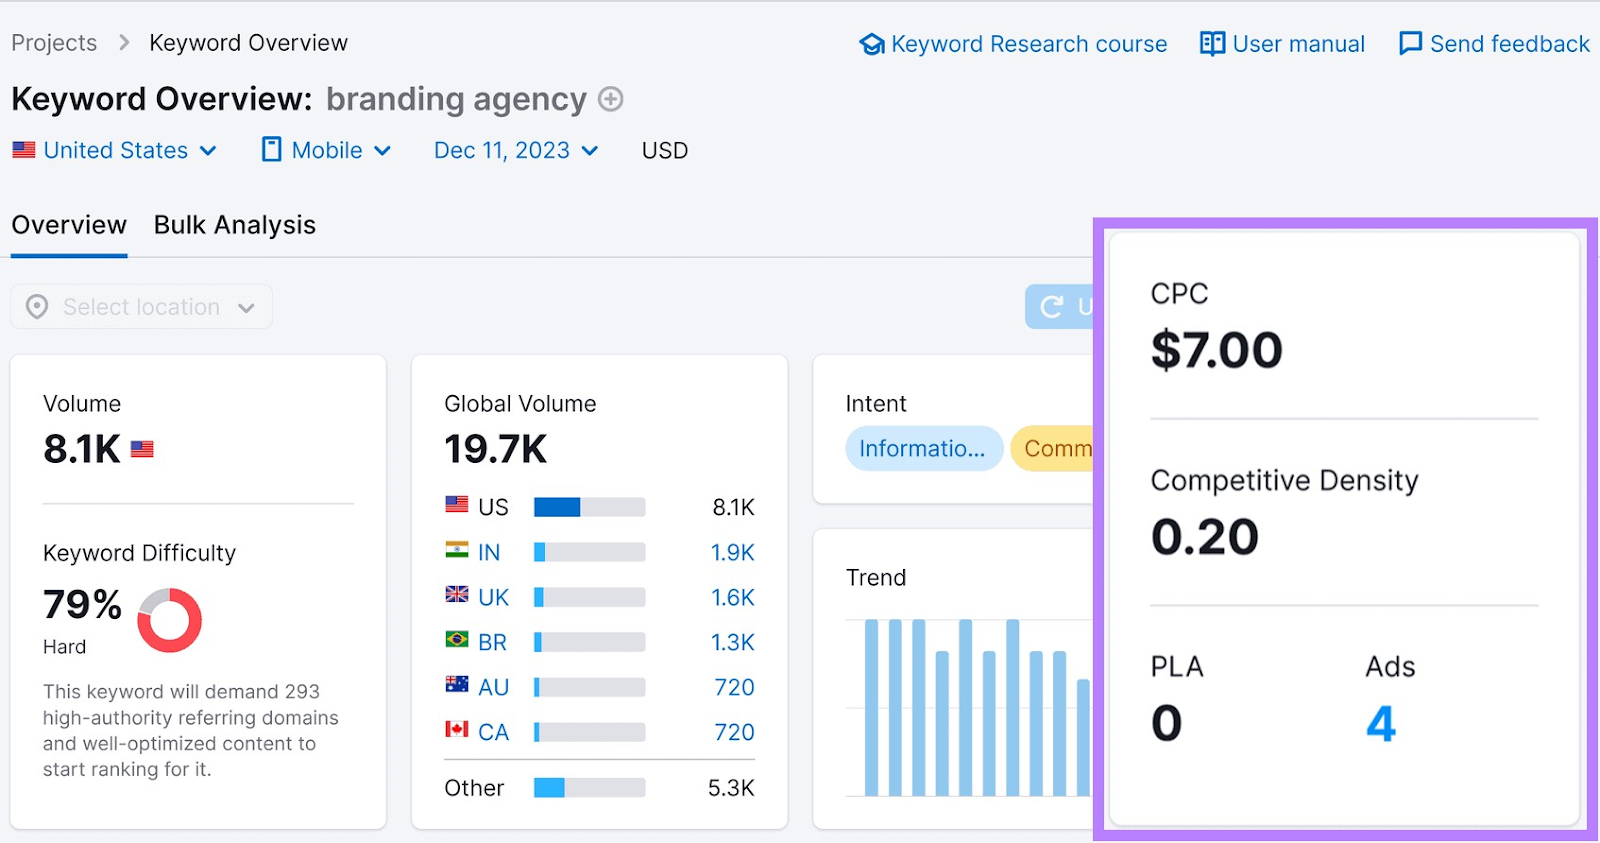 "CPC, competitive density, PLA, and ads " metrics highlighted in "branding agency" keyword overview report